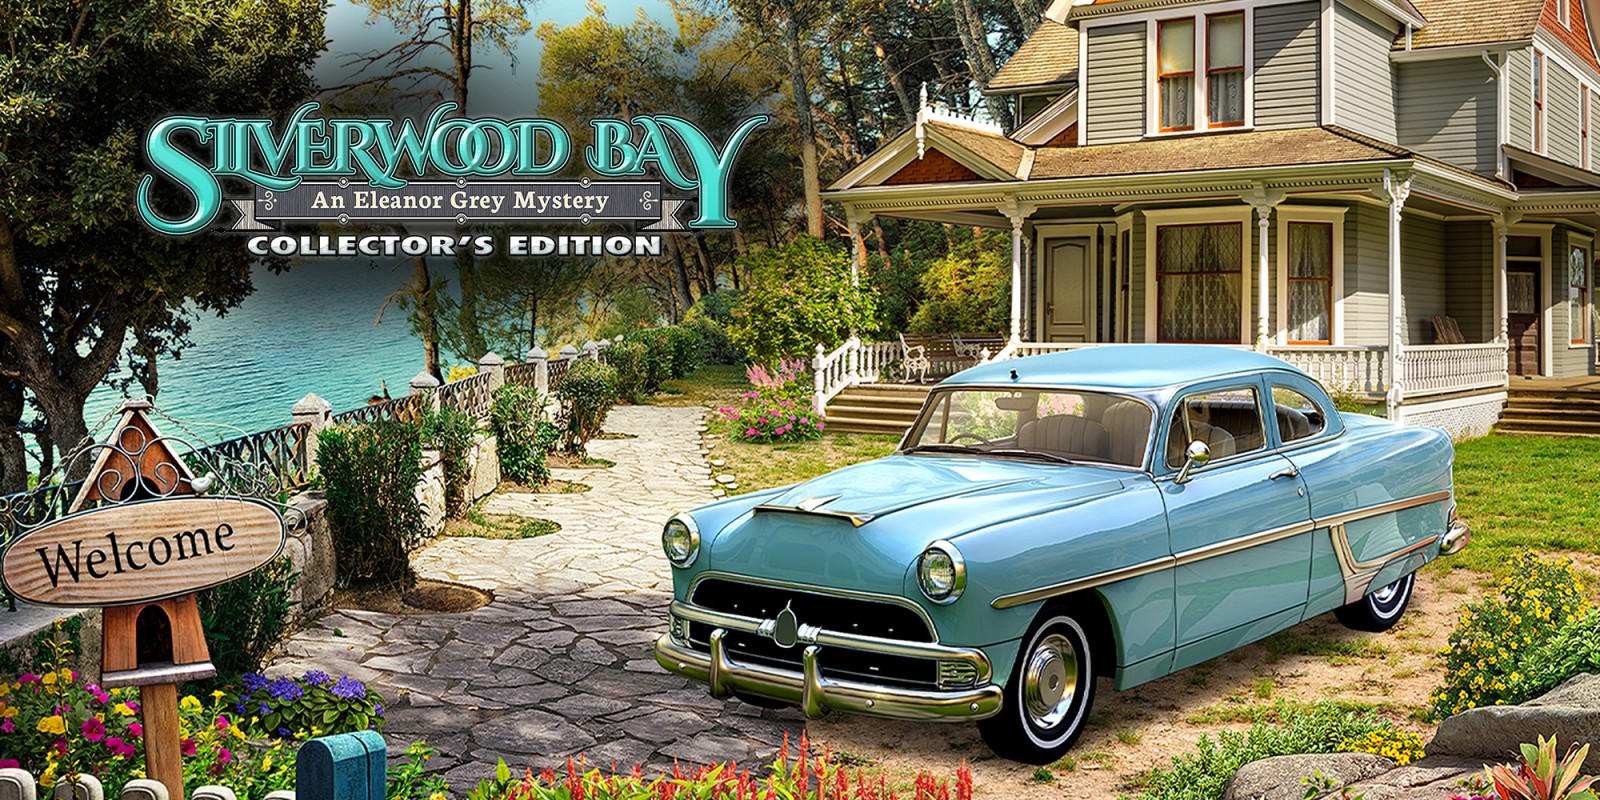 Silverwood Bay An Eleanor Grey Mystery Collector's Edition